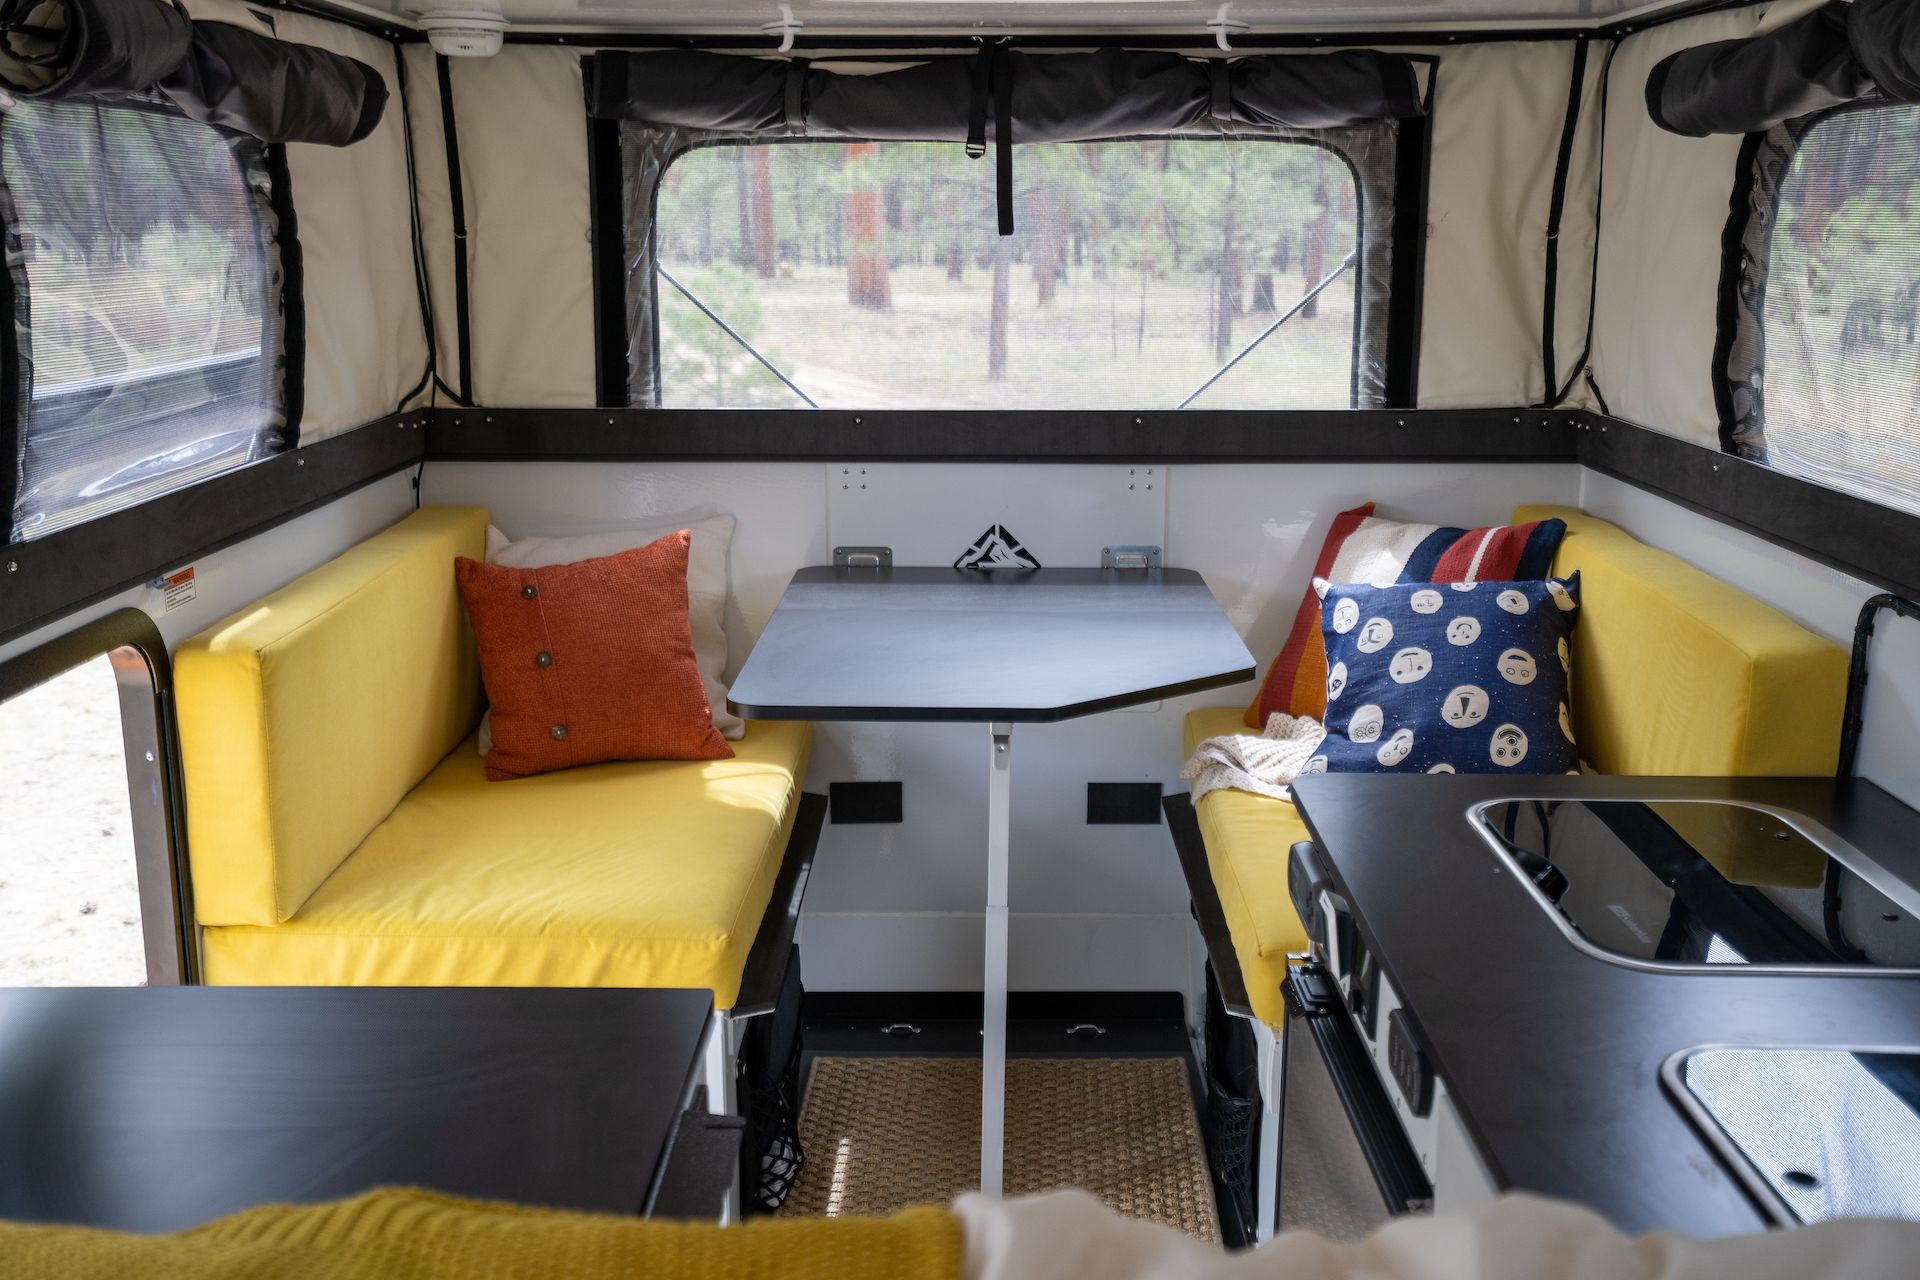 The dinette became our favorite part of this new interior!